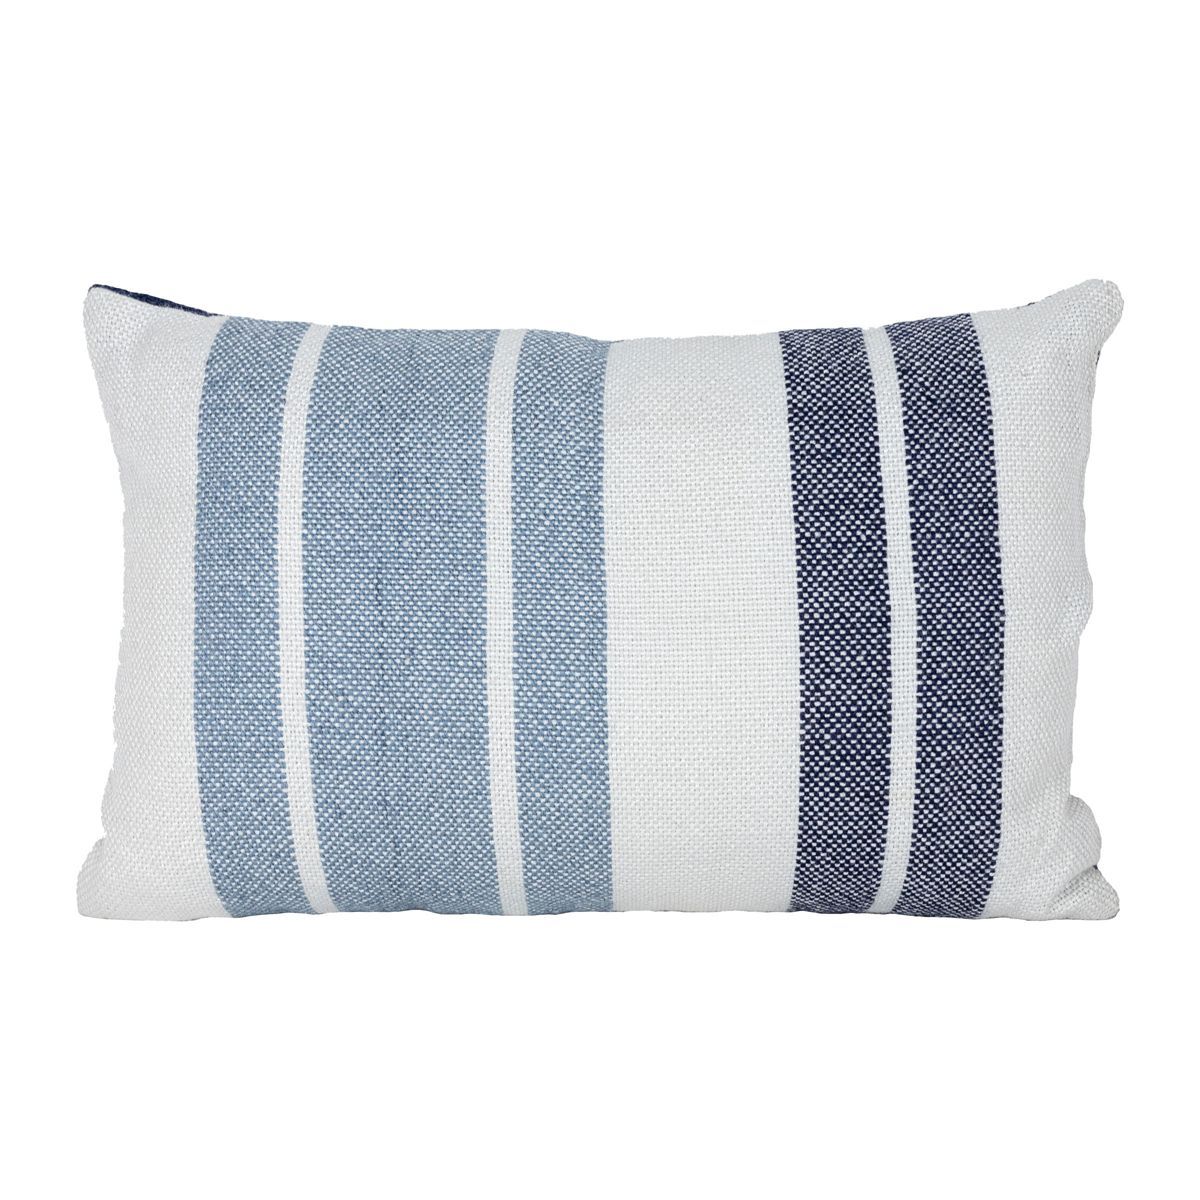 14X22 Inch Hand Woven Blue, White & Navy Striped Outdoor Pillow Polyester With Polyester Fill by ... | Target